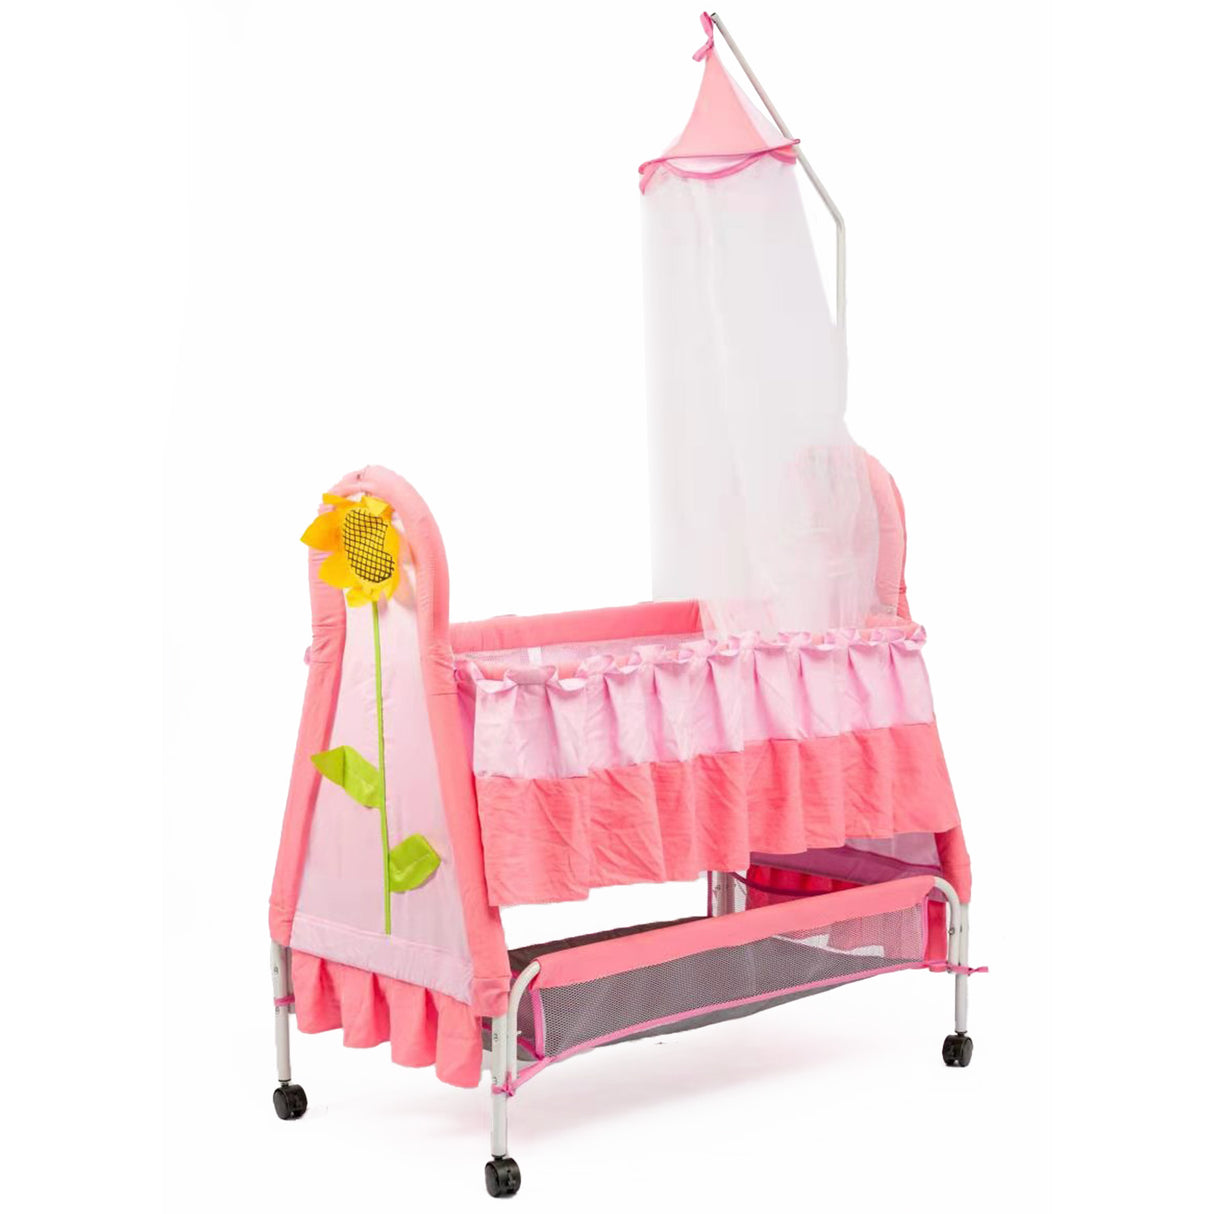 Sunflower Comfort And Luxurious Cradle With Mosquito Net